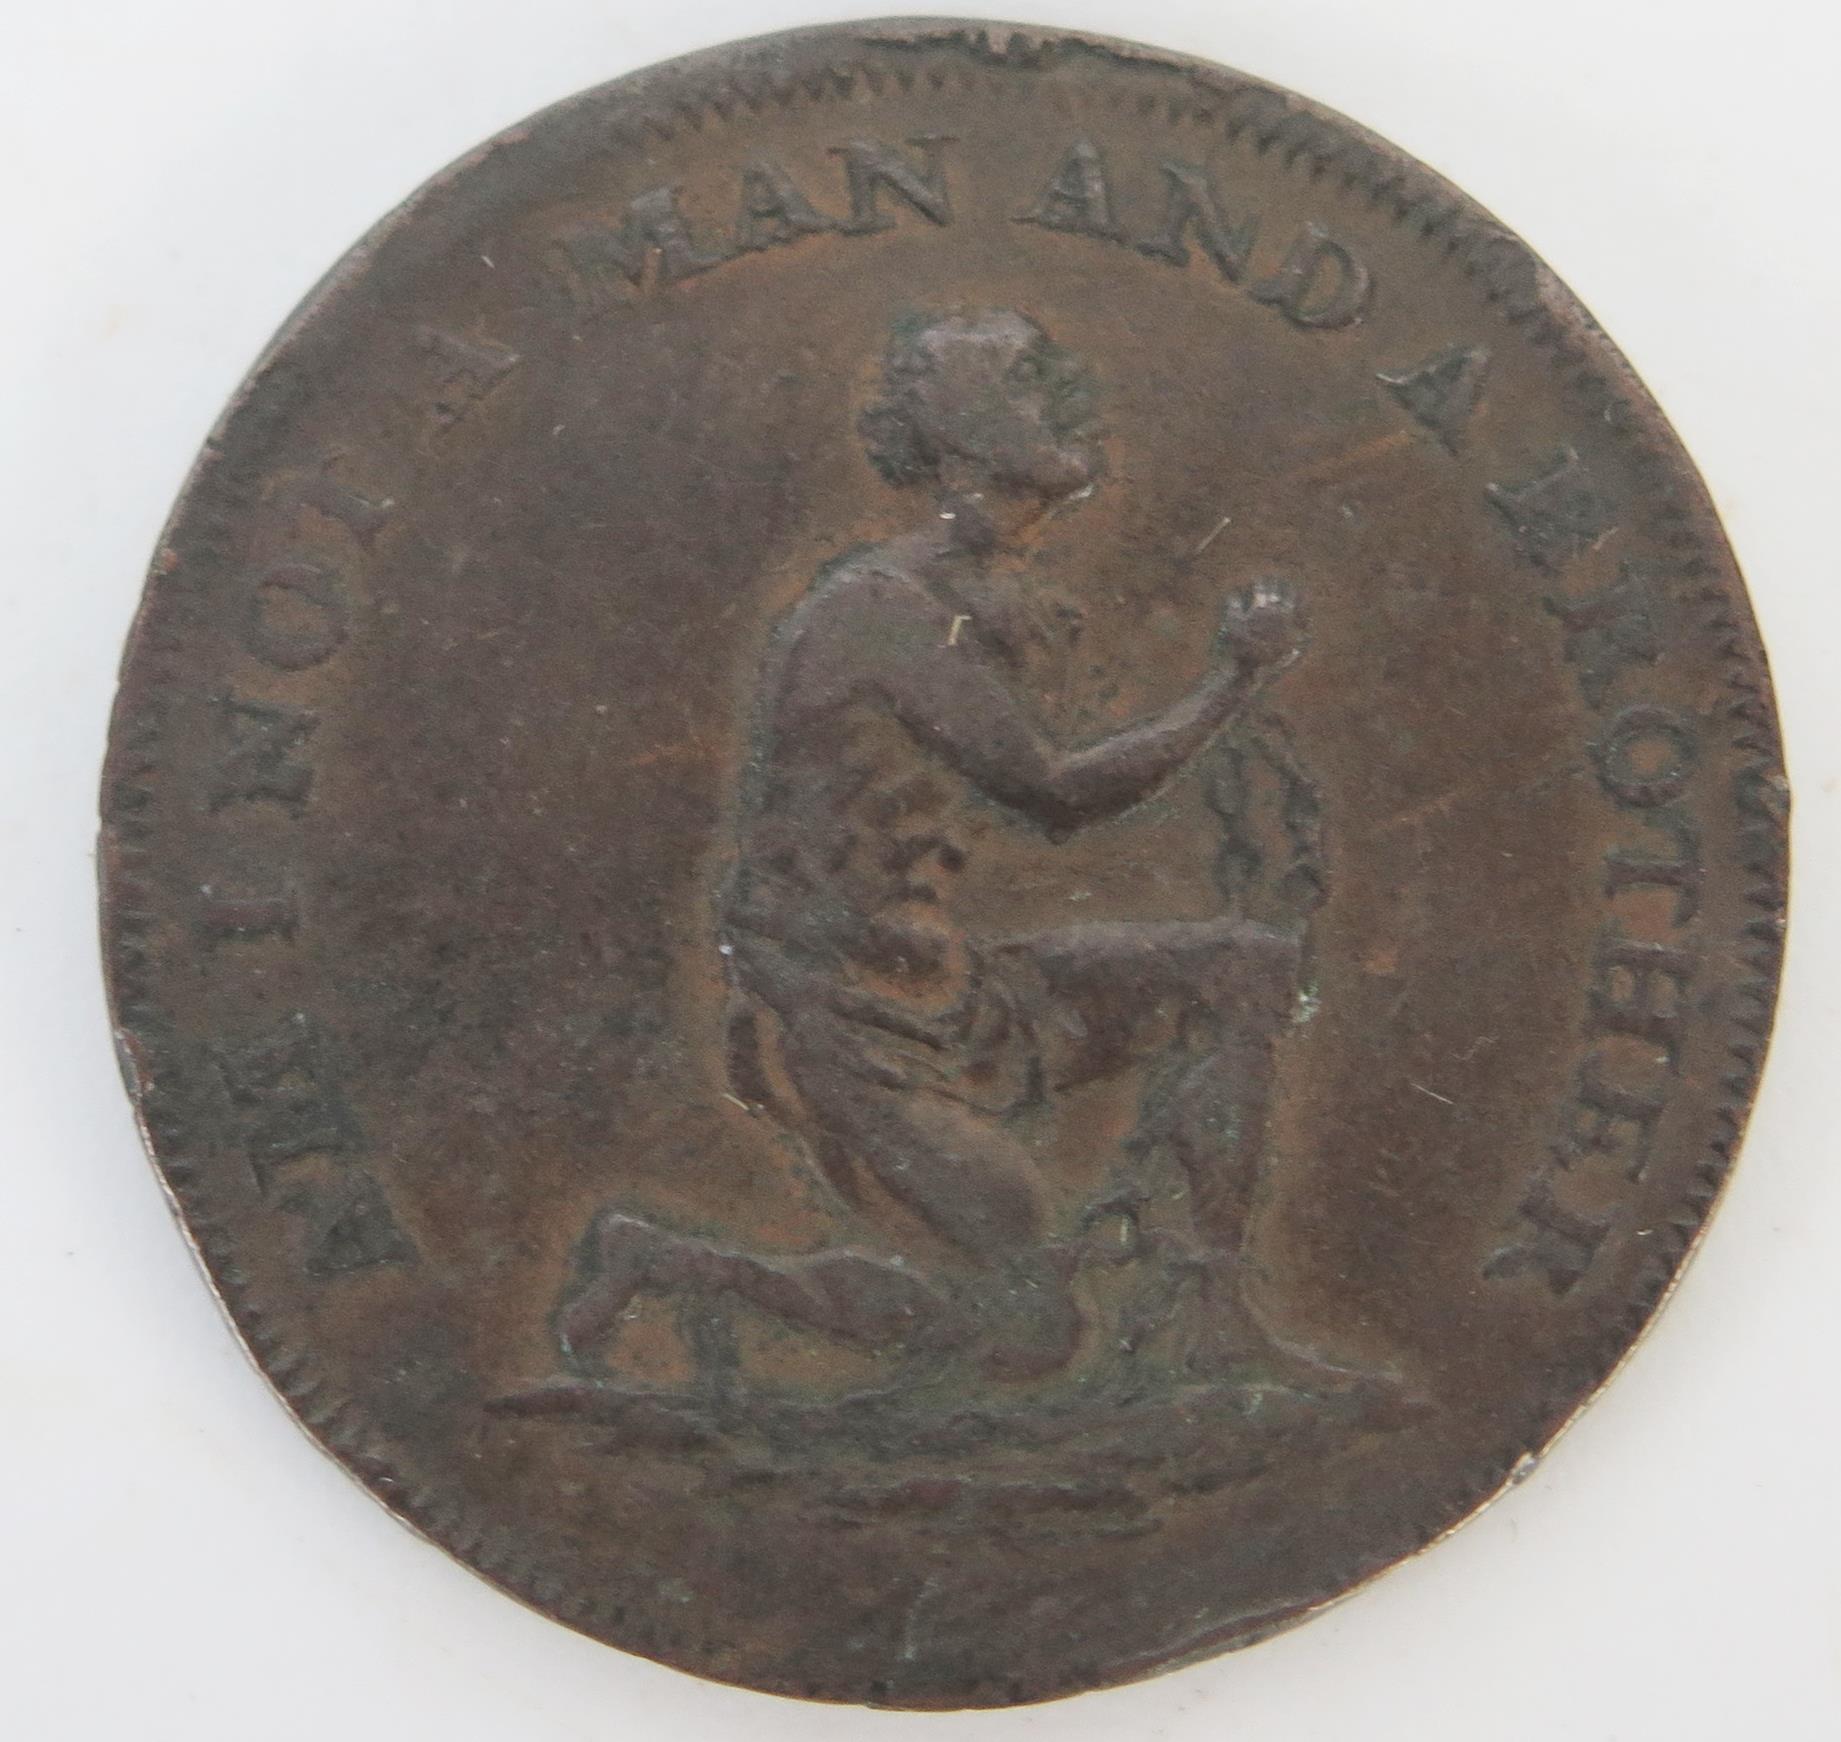 Middlesex, Political + Social Series, Lutwyche’s Anti-slavery halfpenny undated but c.1795. Kneeling